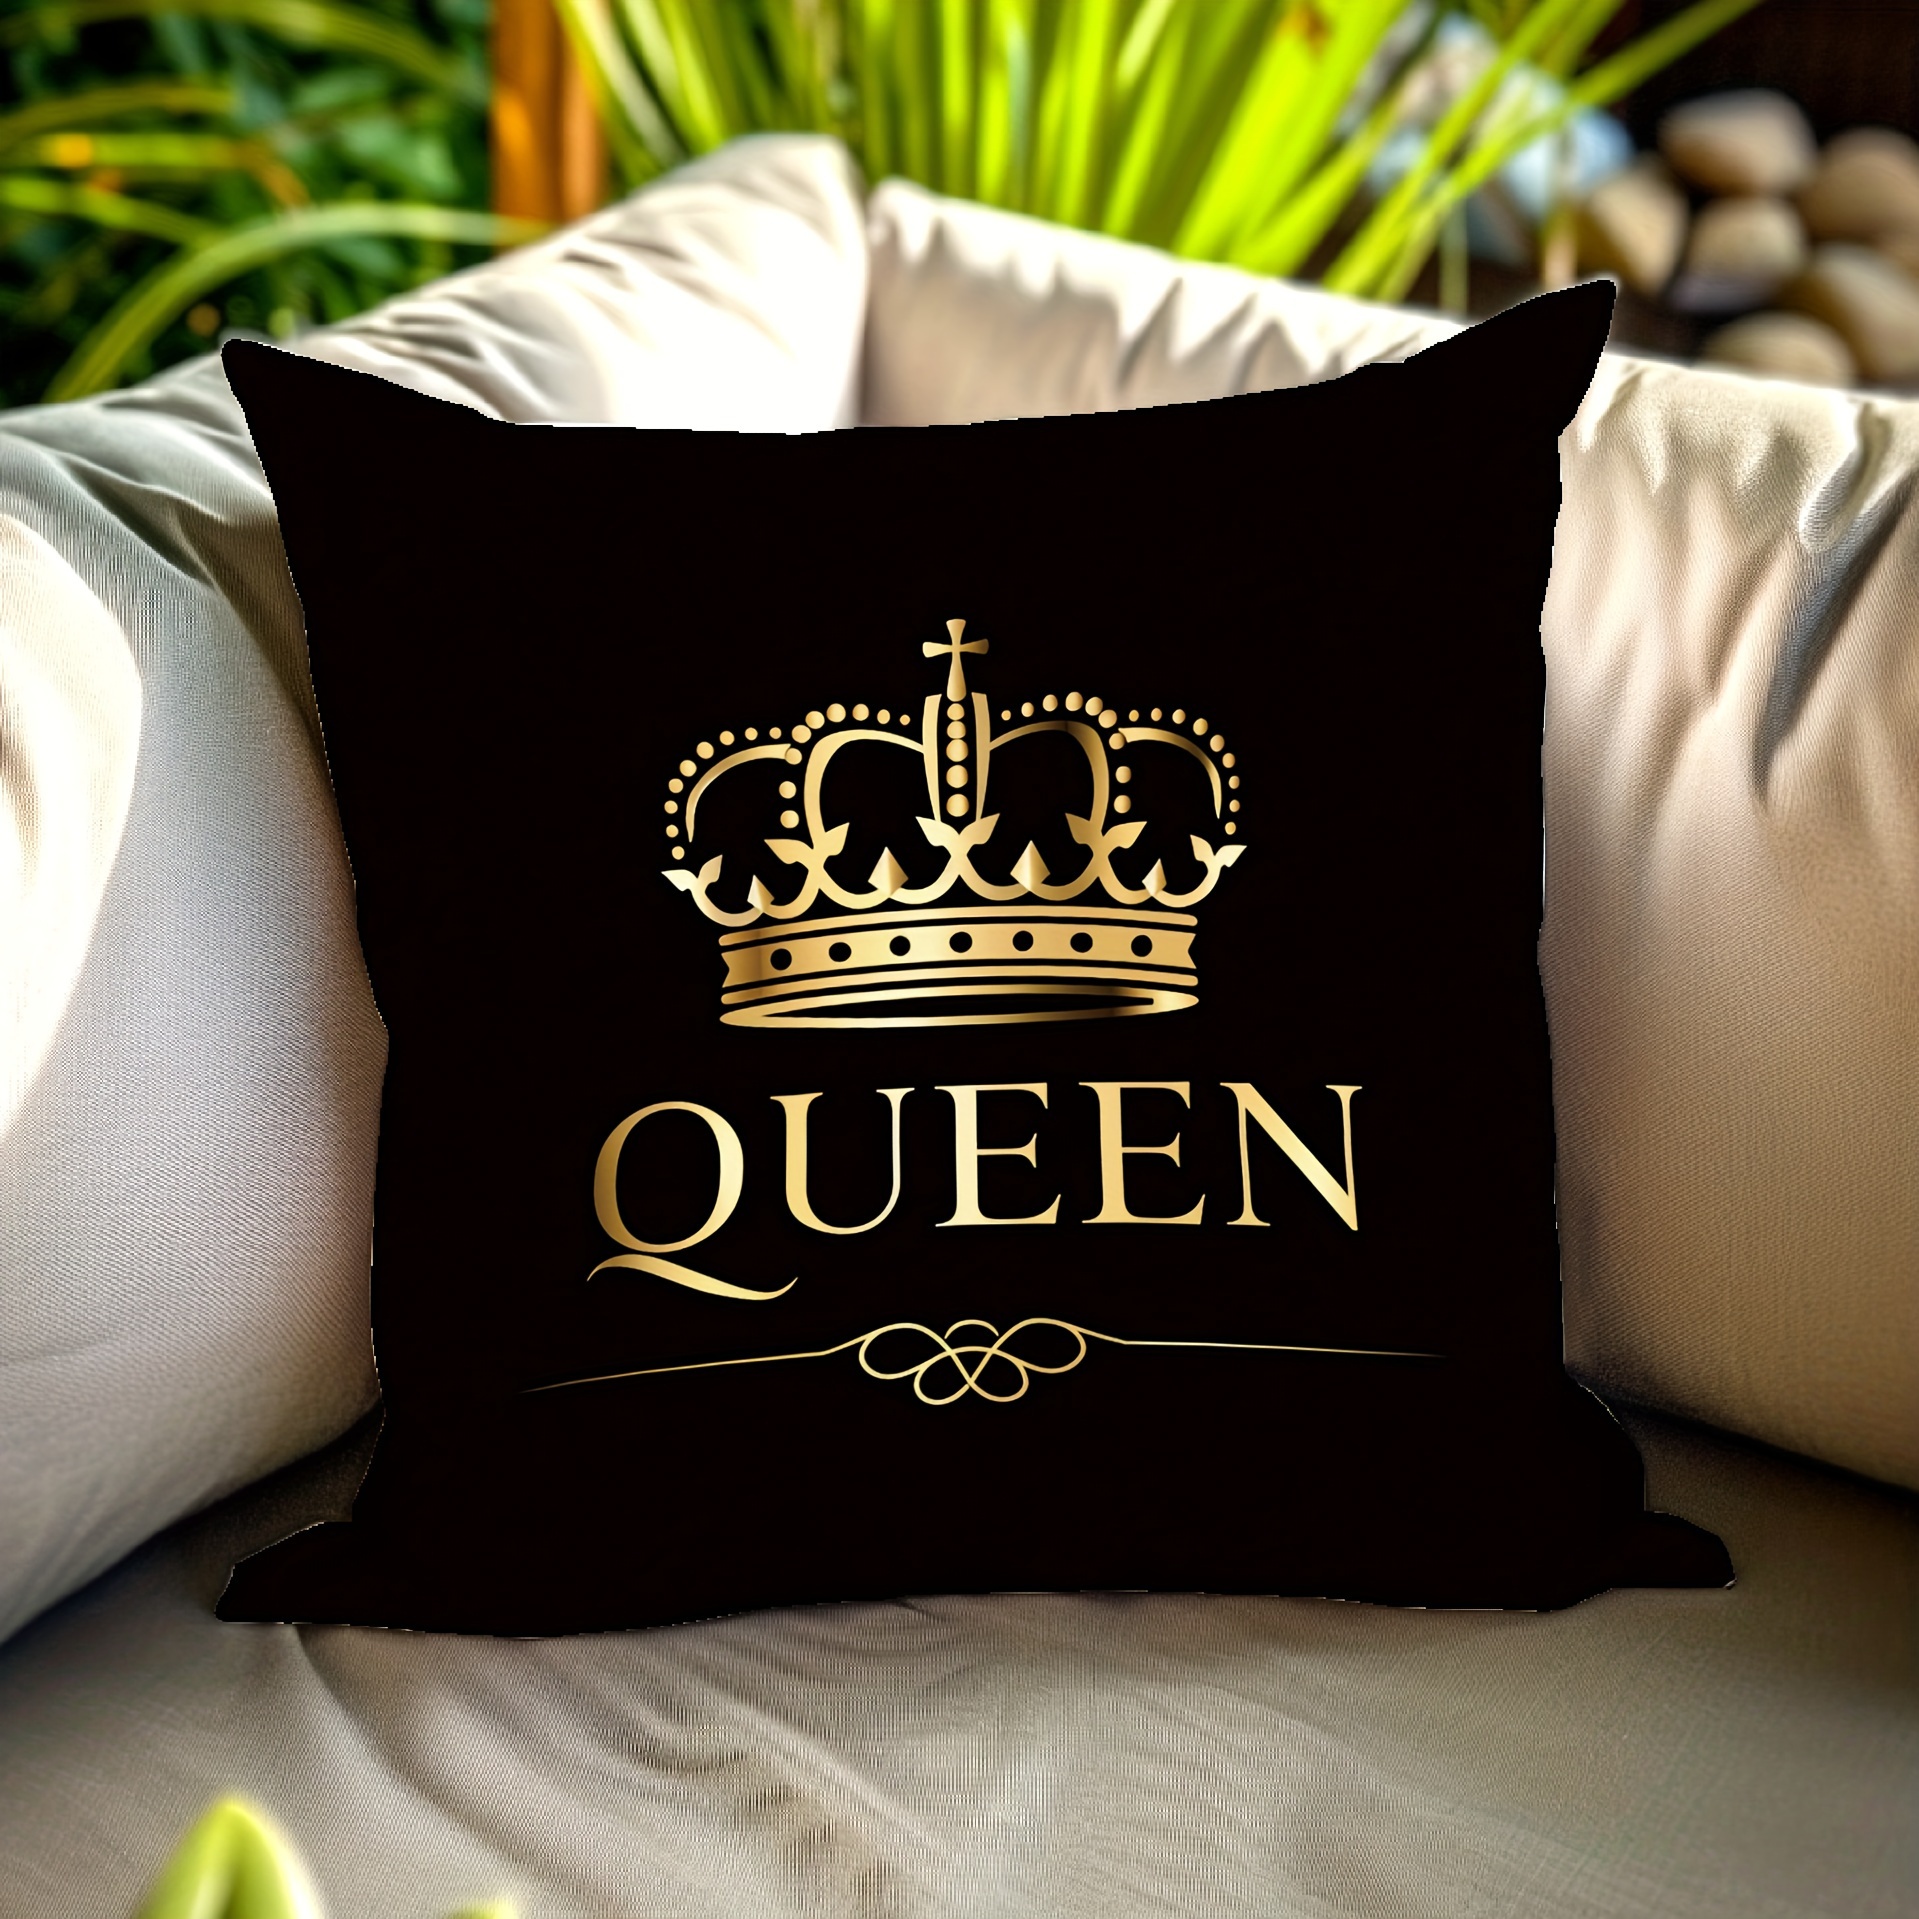 

1pc, The Crown, The Queen, Gifts, Pillow Case, Home Decor, Holiday Decor, Home Decor, Room Decor, For Sofa, Bed, Car, Bedroom, 18x18 Inch, No Pillow Core